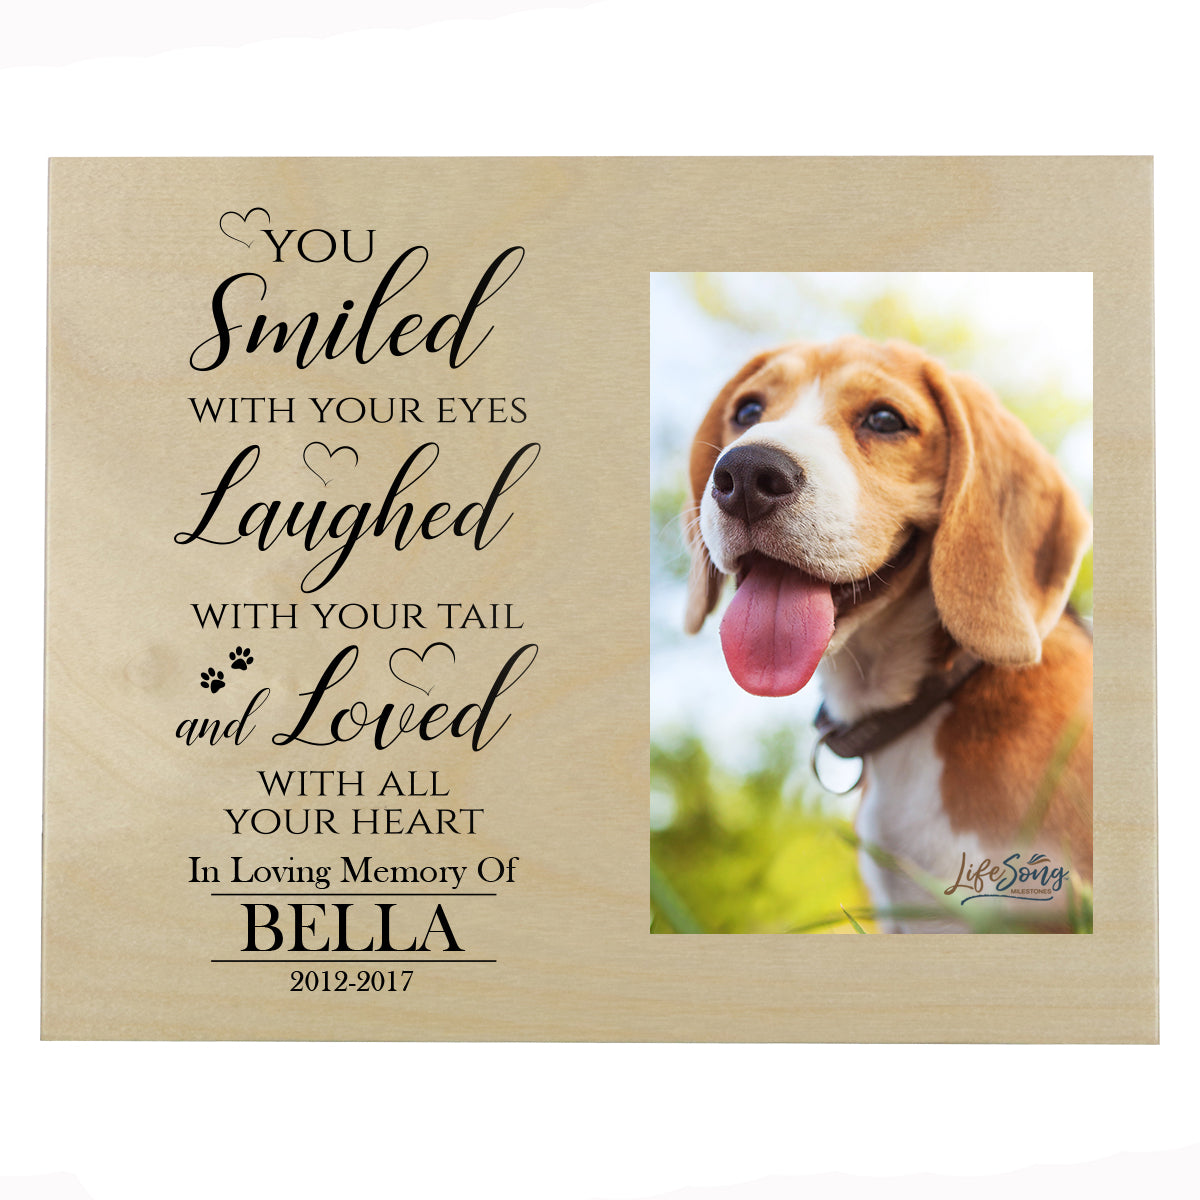 Pet Memorial Photo Wall Plaque Décor - You Smiled With Your Eyes